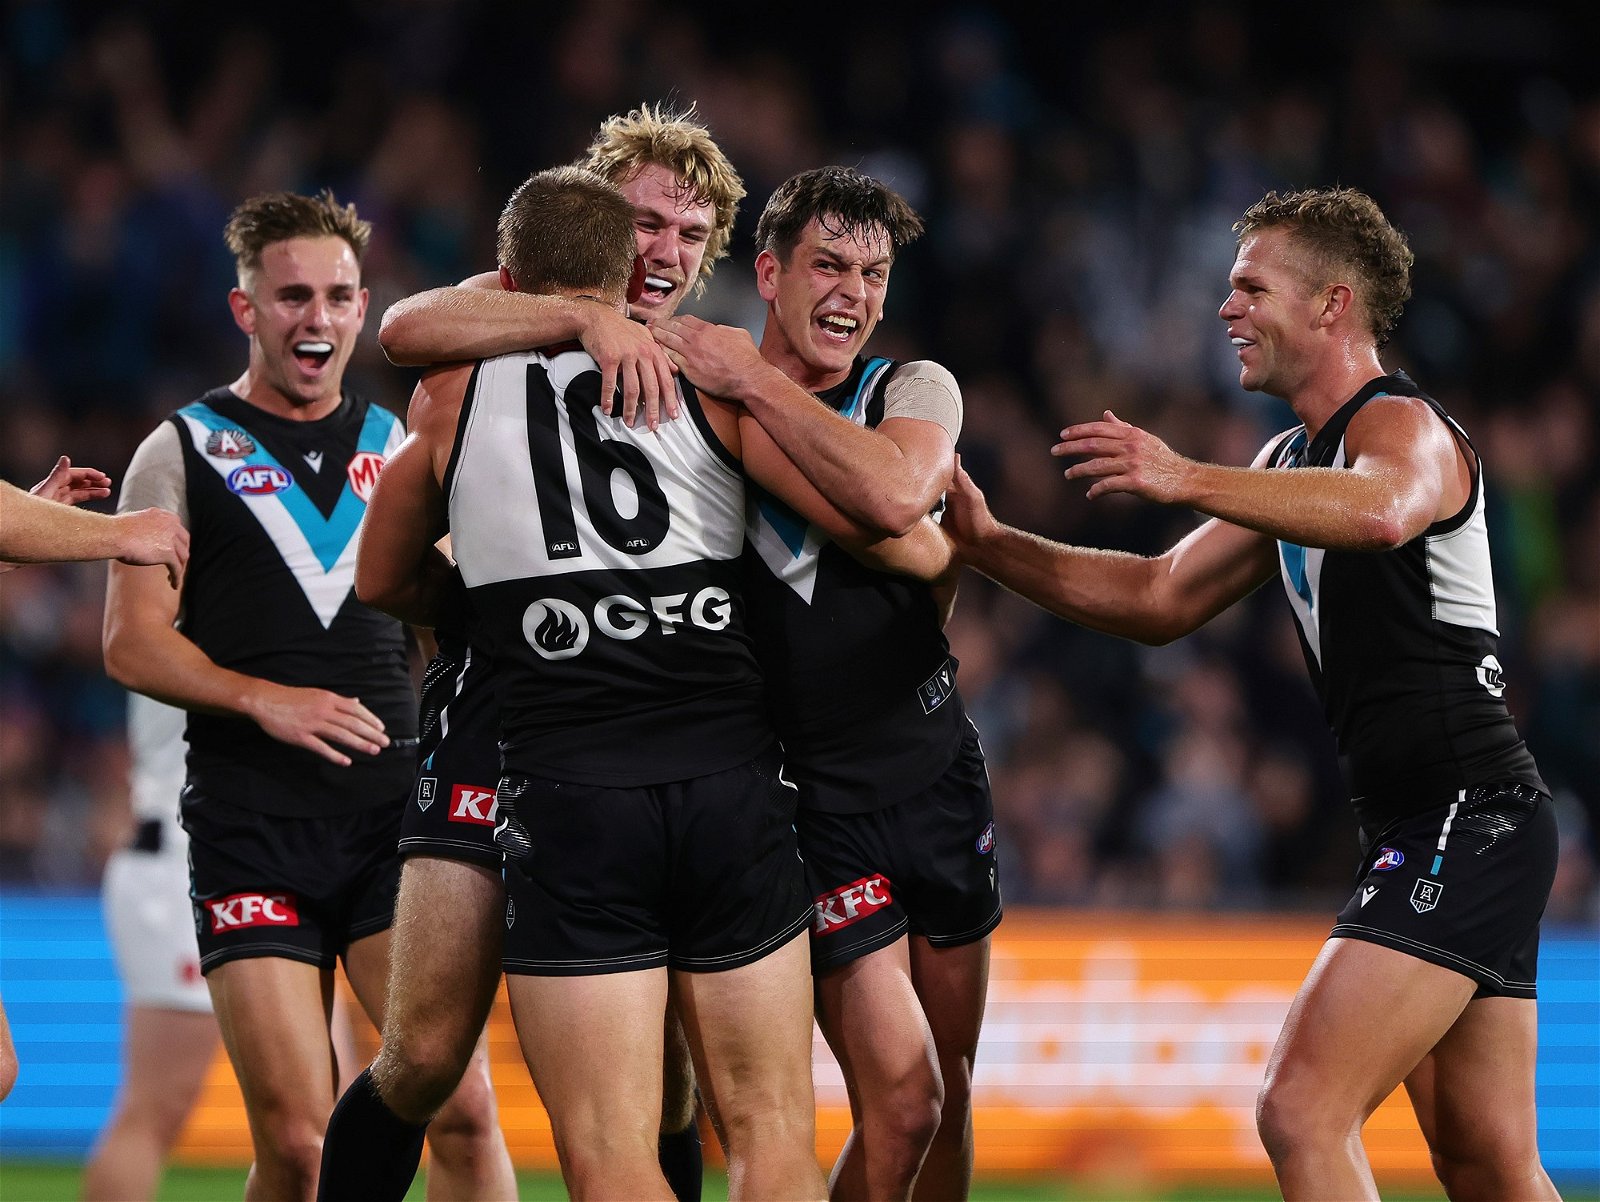 Port Adelaide players congratulate Ollie Wines after a goal against St Kilda.